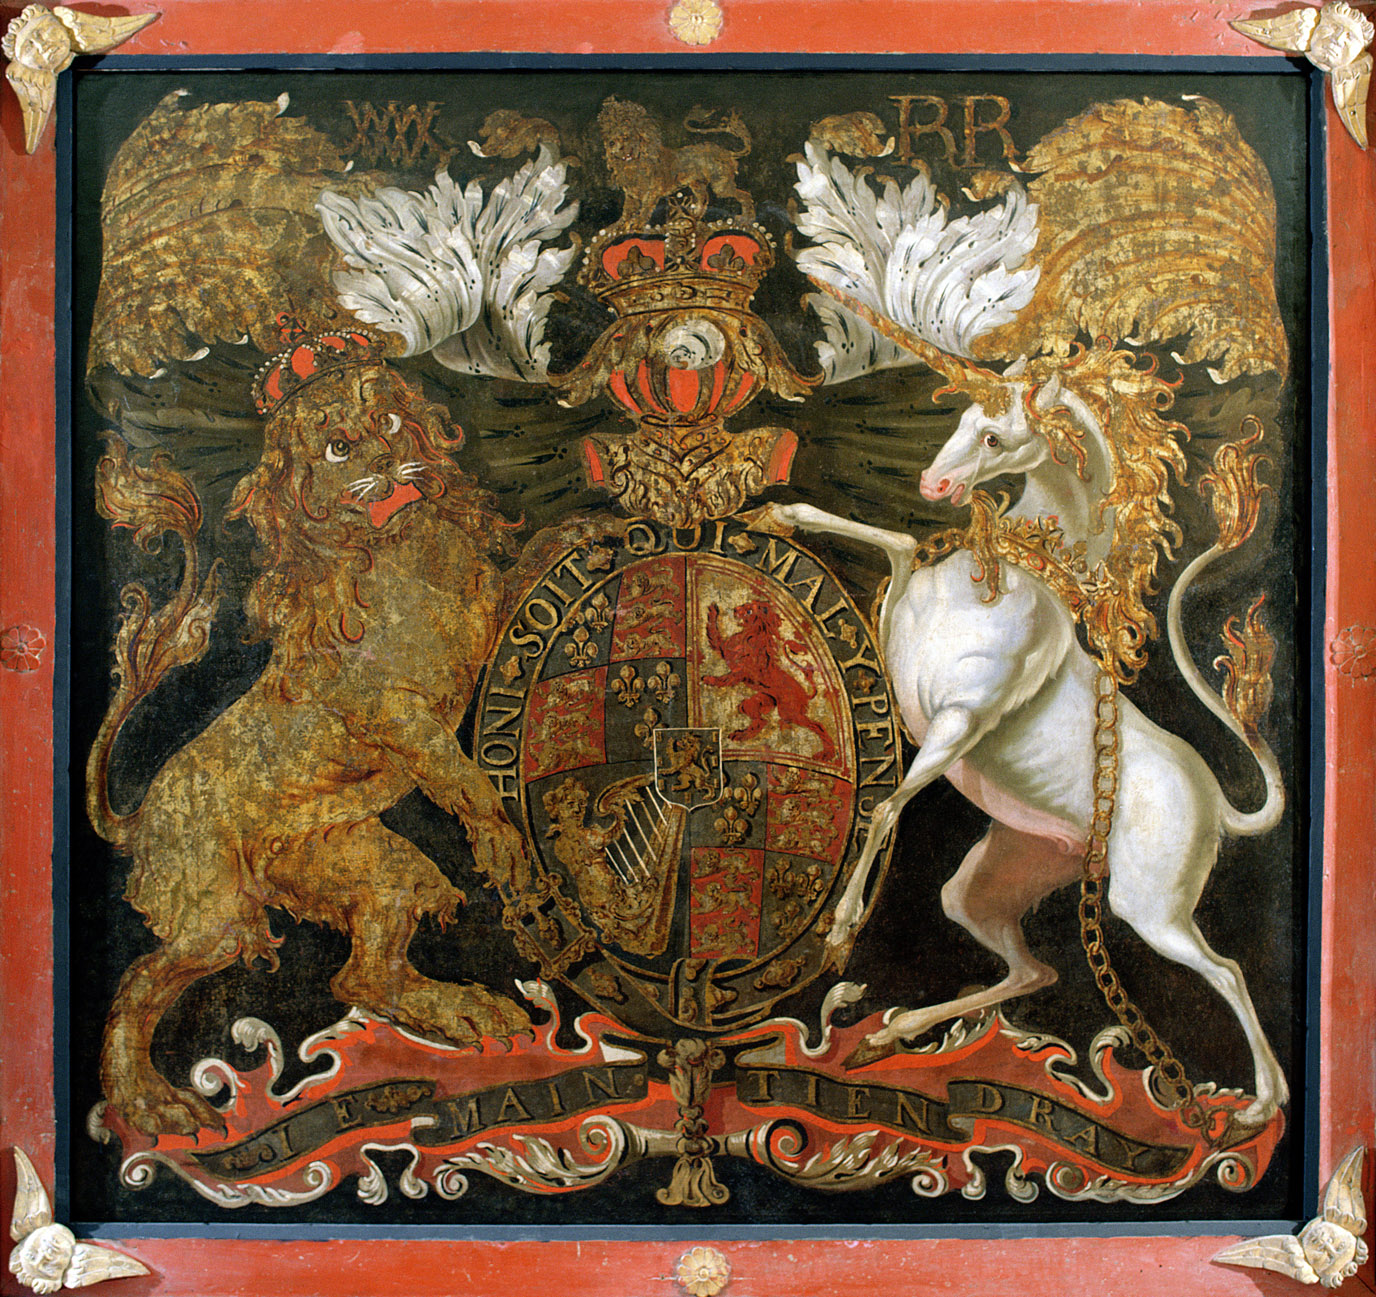 Royal coat of arms of King William III and Queen Mary II of England, c. 1690.